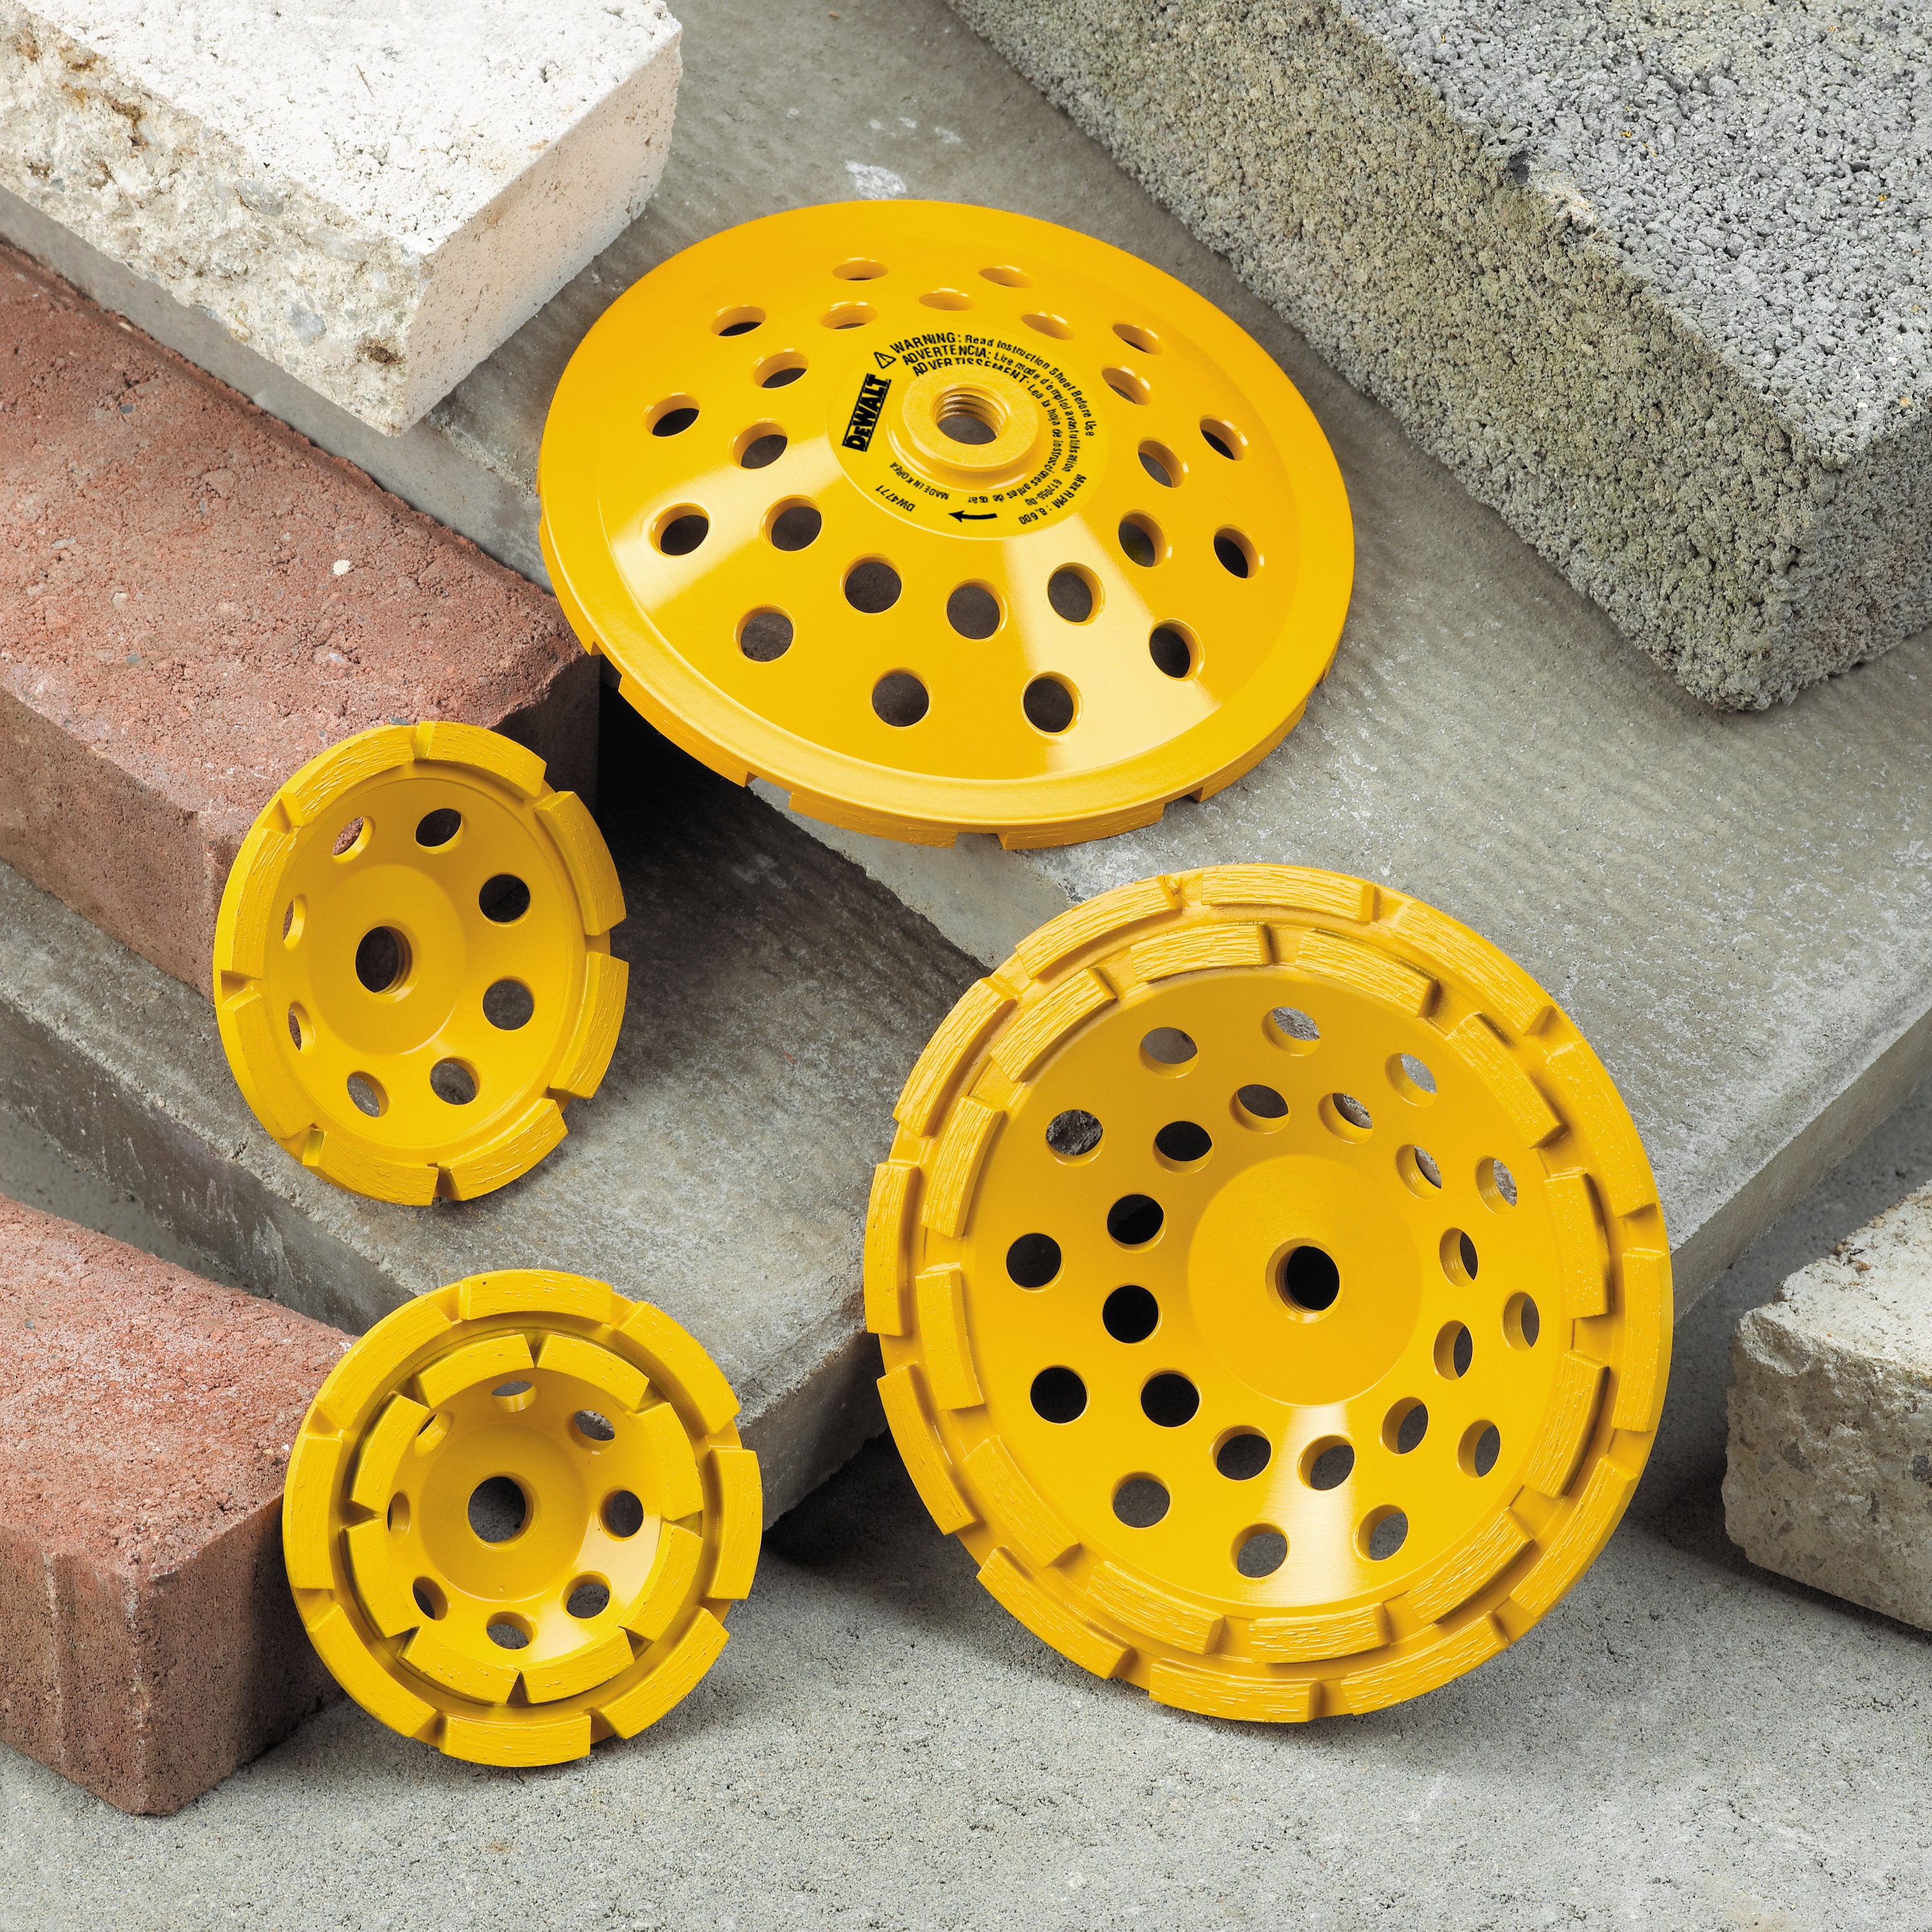 Surface Grinding Wheels placed on pile of concrete blocks.